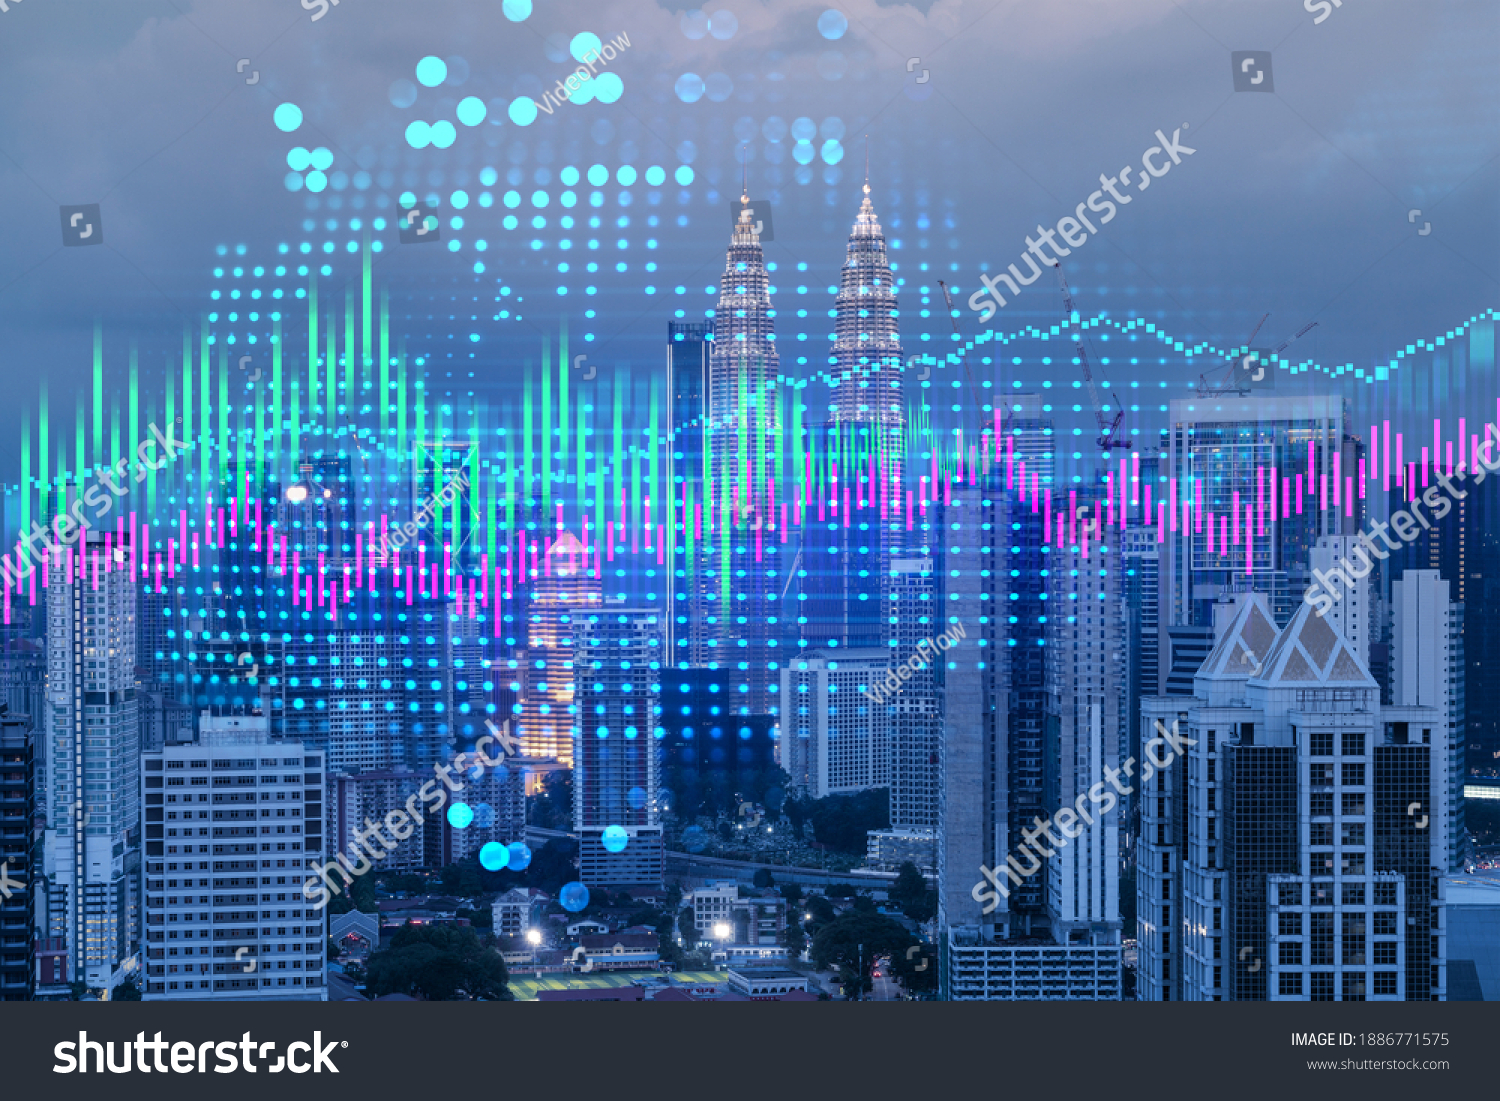 Stock market graph hologram, night panorama city view of Kuala Lumpur. KL is popular location to gain financial education in Malaysia, Asia. The concept of international research. Double exposure. #1886771575